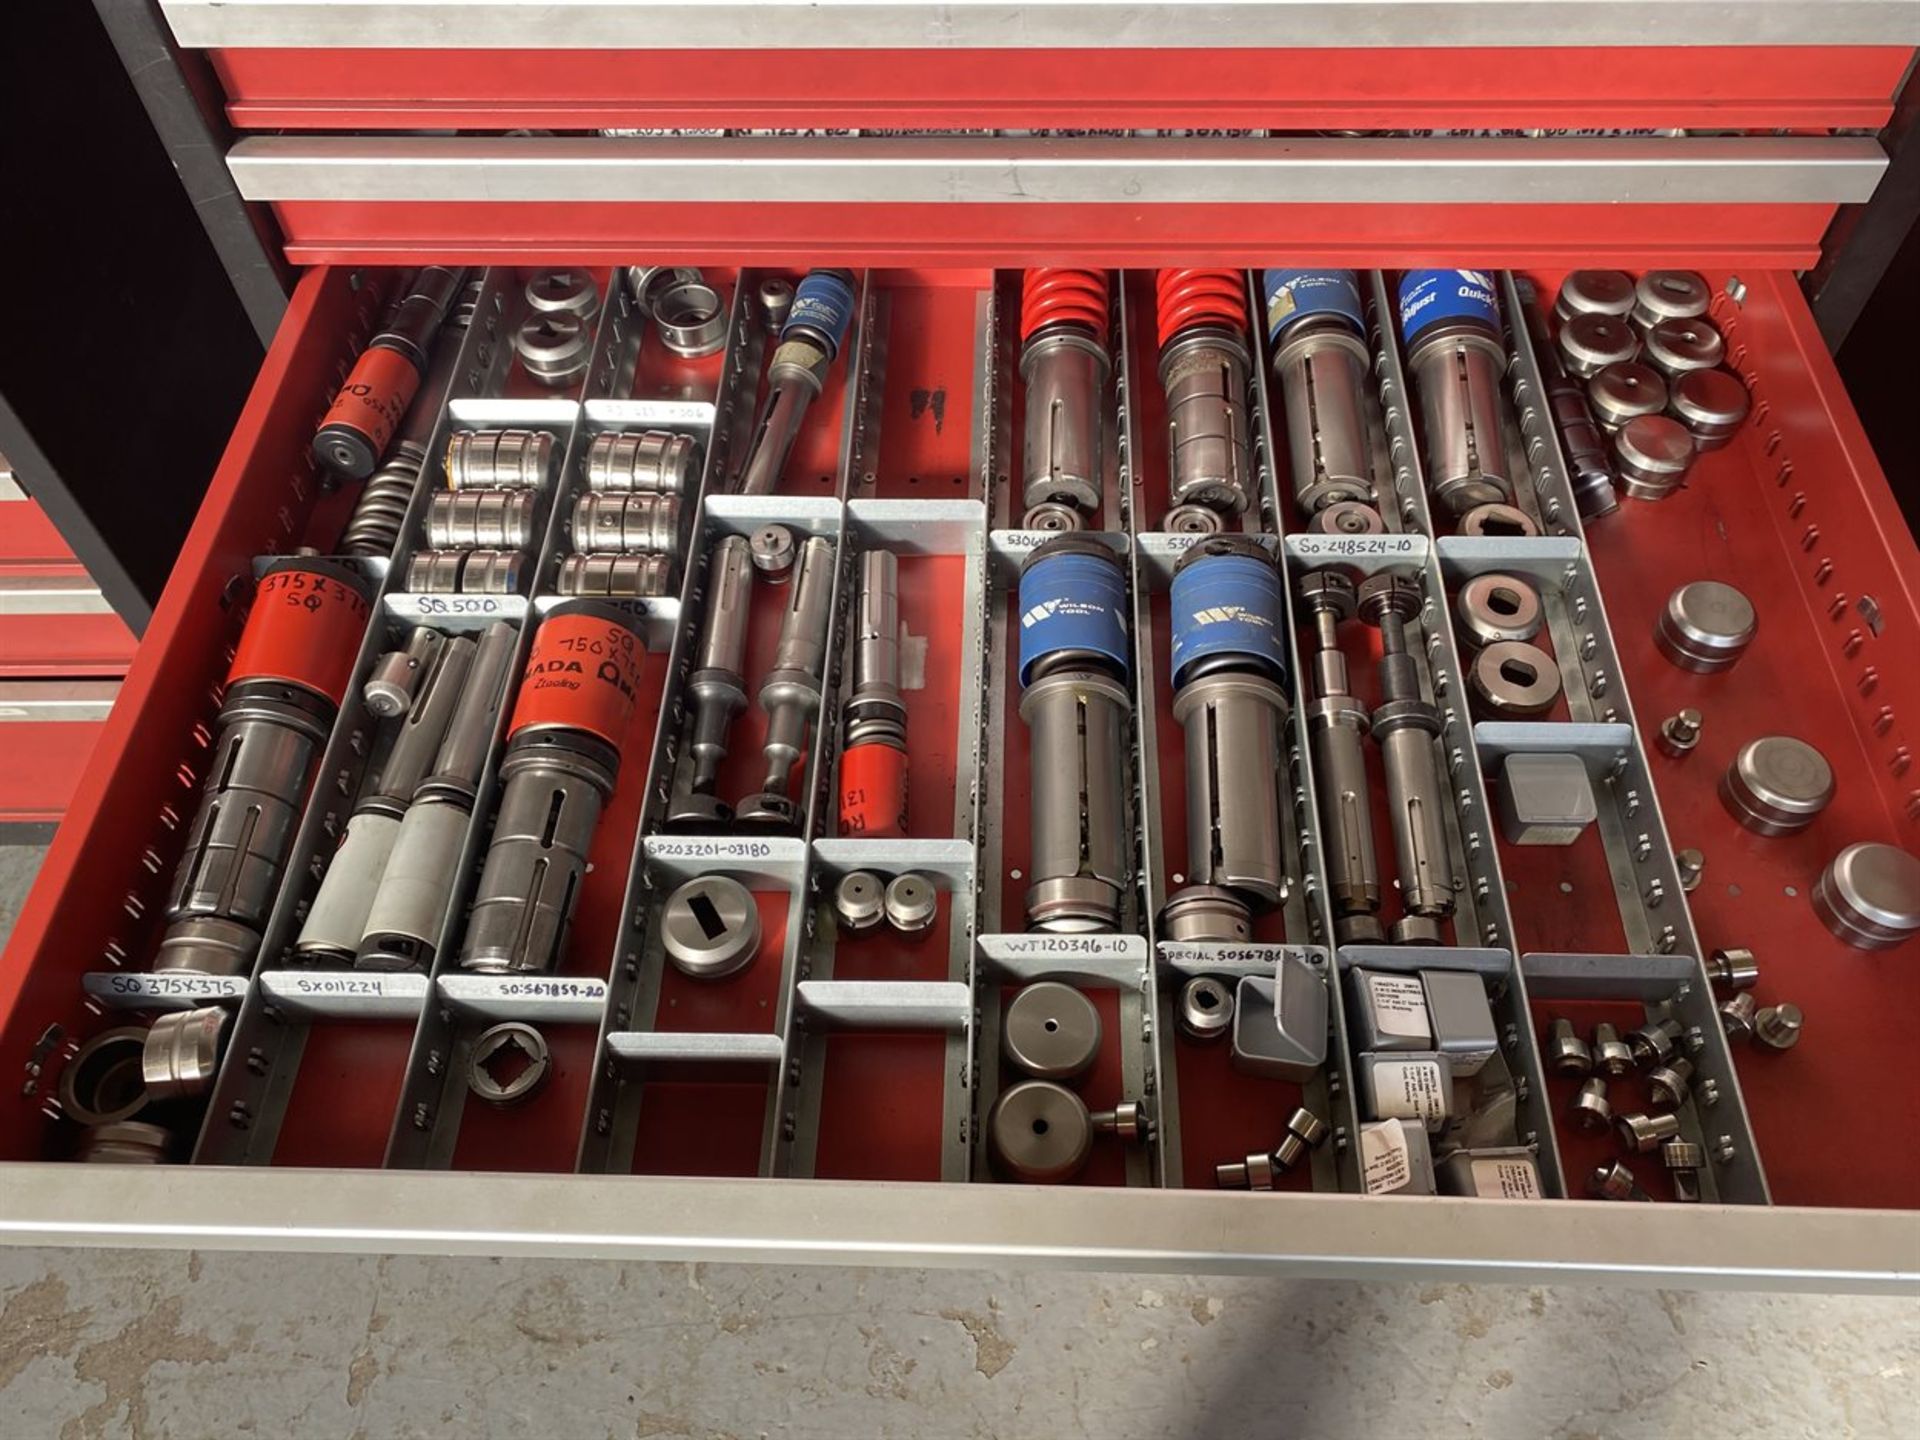 AMADA Tooling Cabinet w/ Assorted Turret Tooling - Image 6 of 10